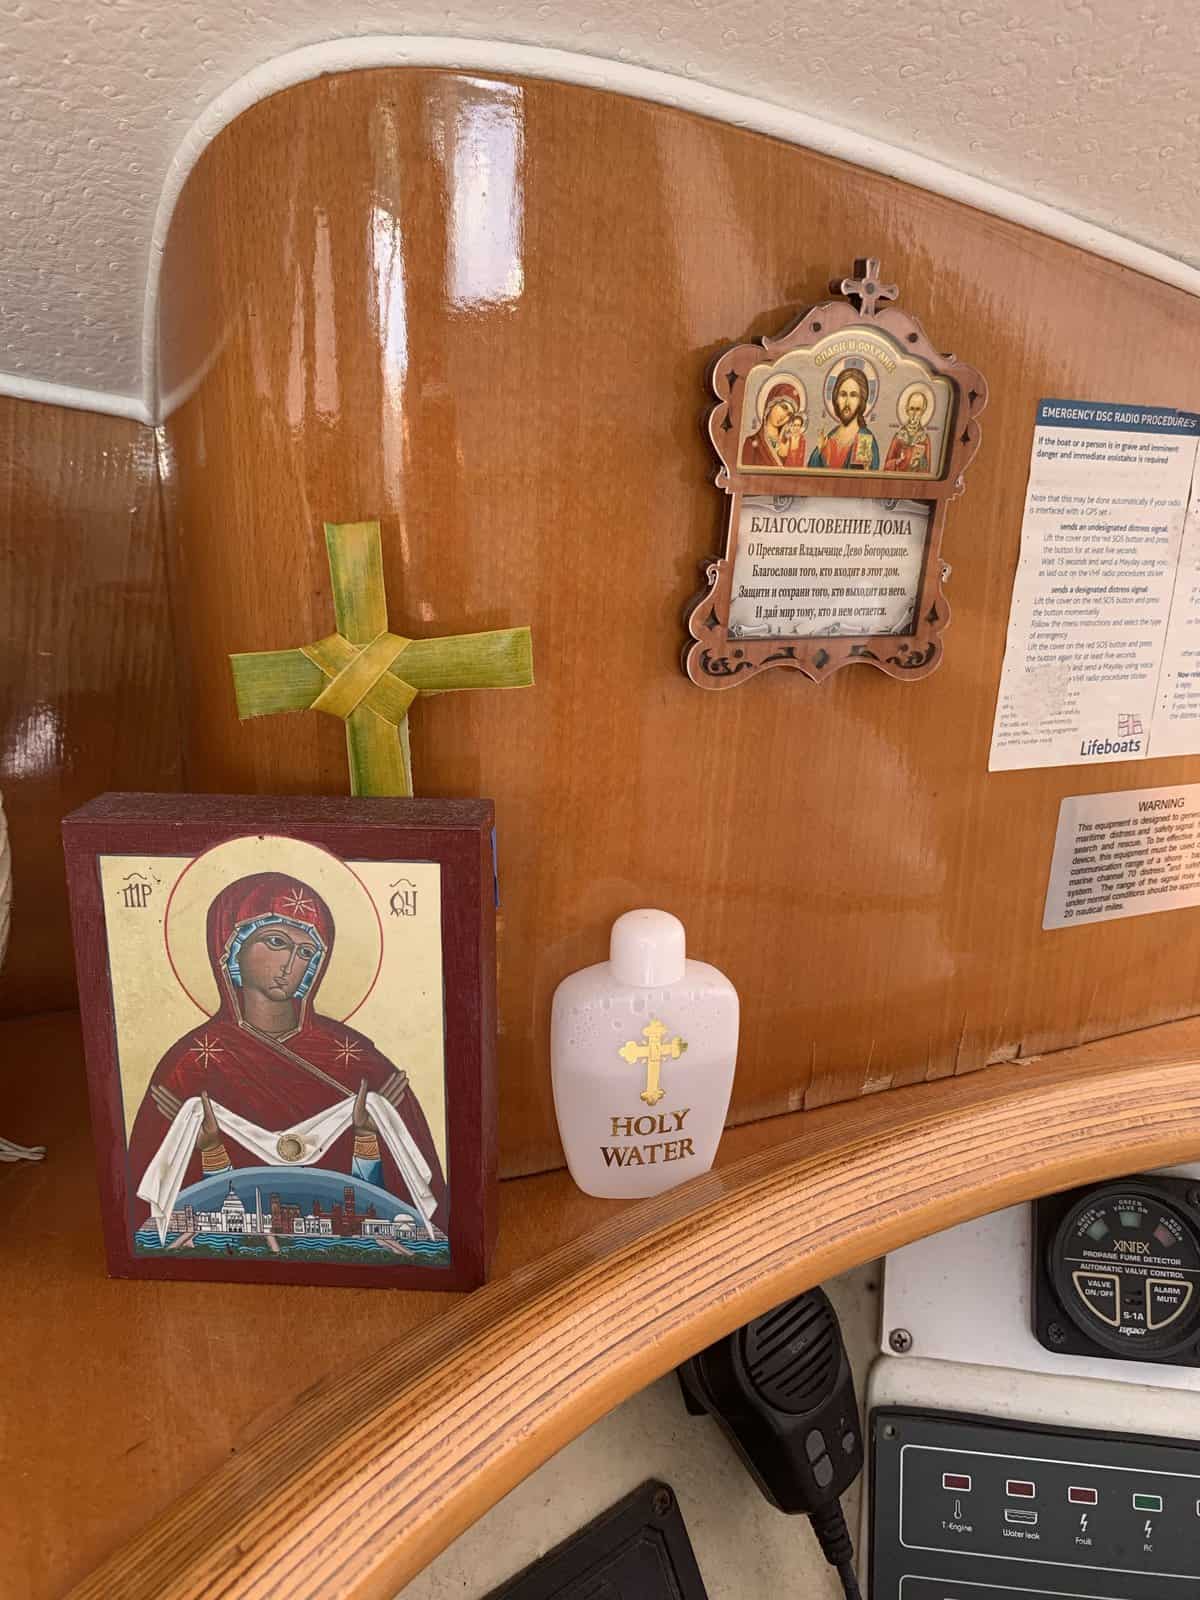 icon corner on a boat, with holy water bottle